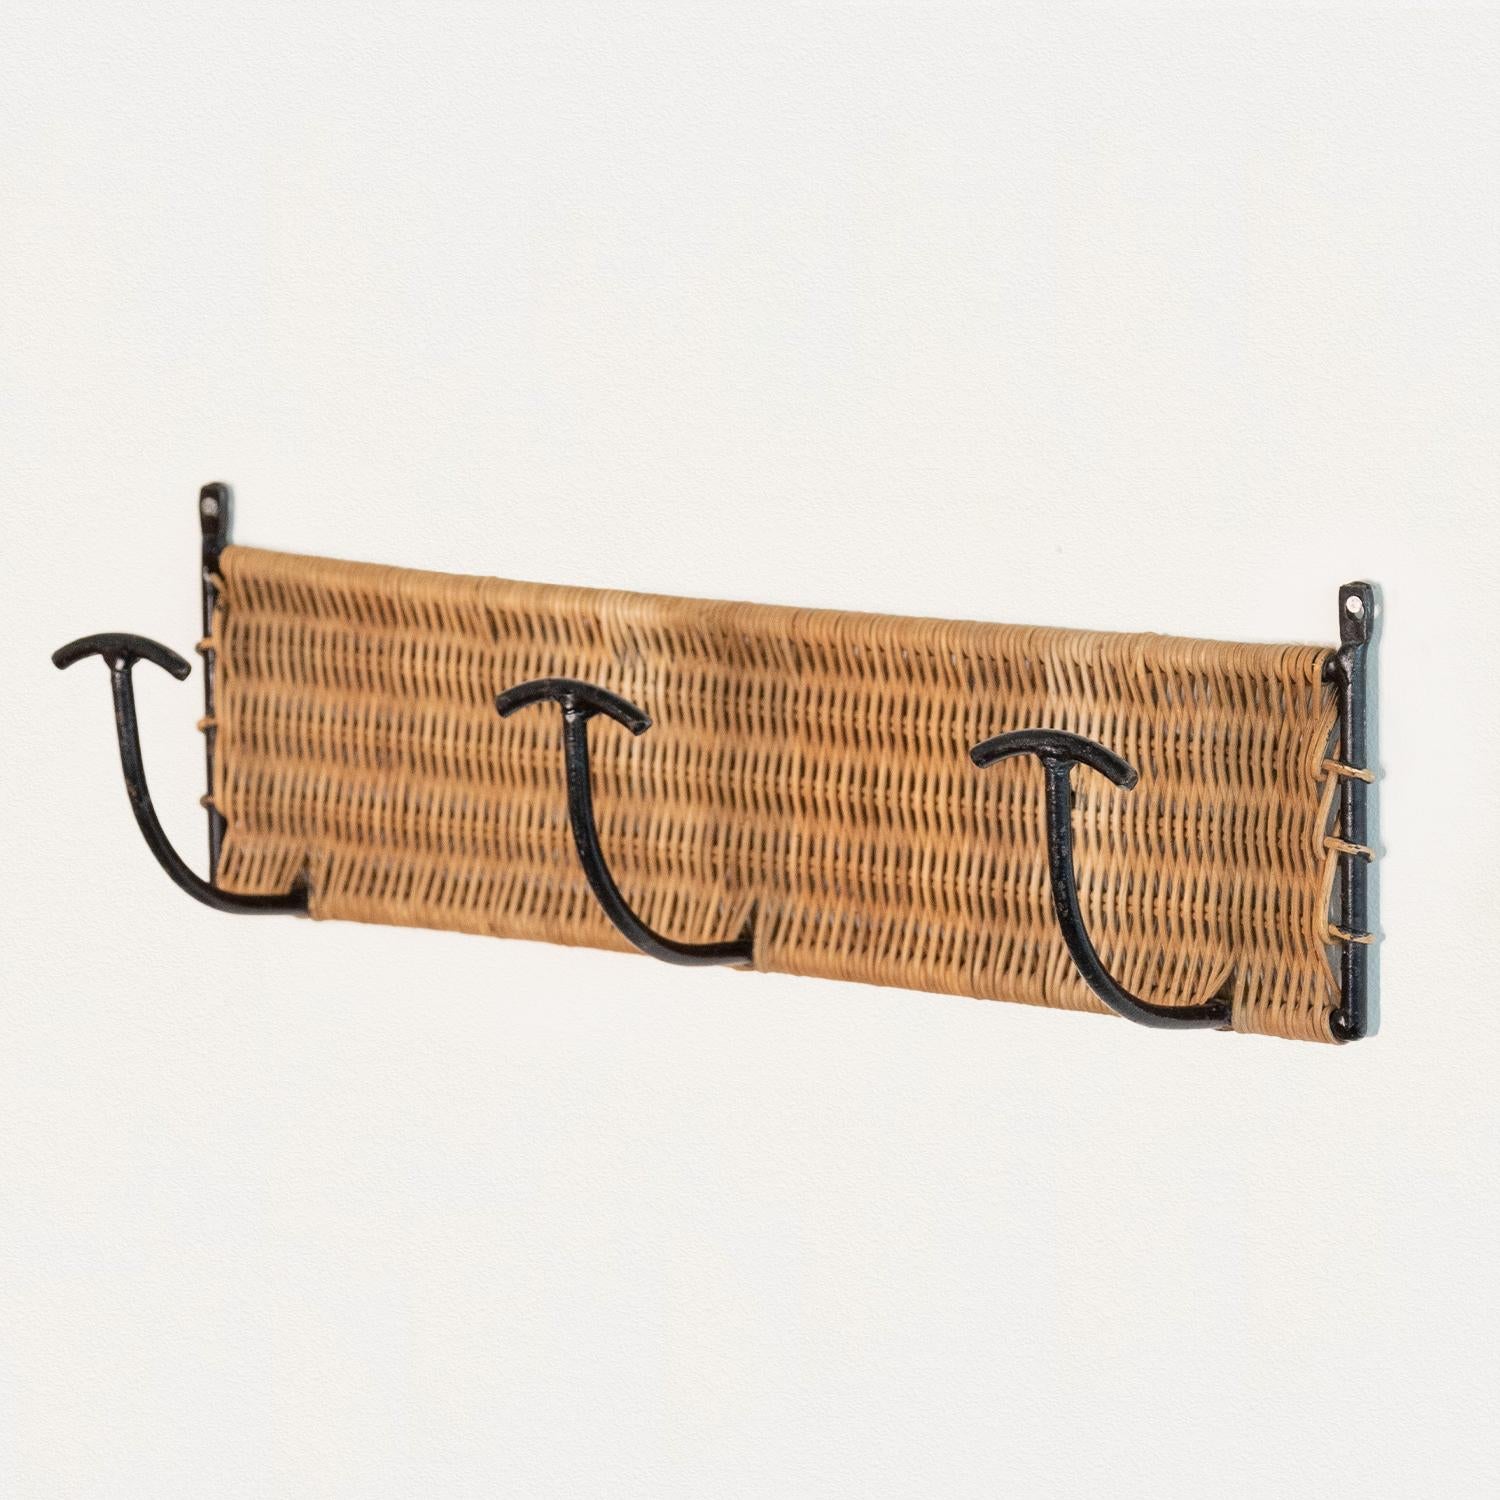 Vintage woven wicker wall rack with 3 iron hooks to hang coats or hats. Black painted iron and wicker is all original. Beautiful and functional piece from France, 1950s. Three available.